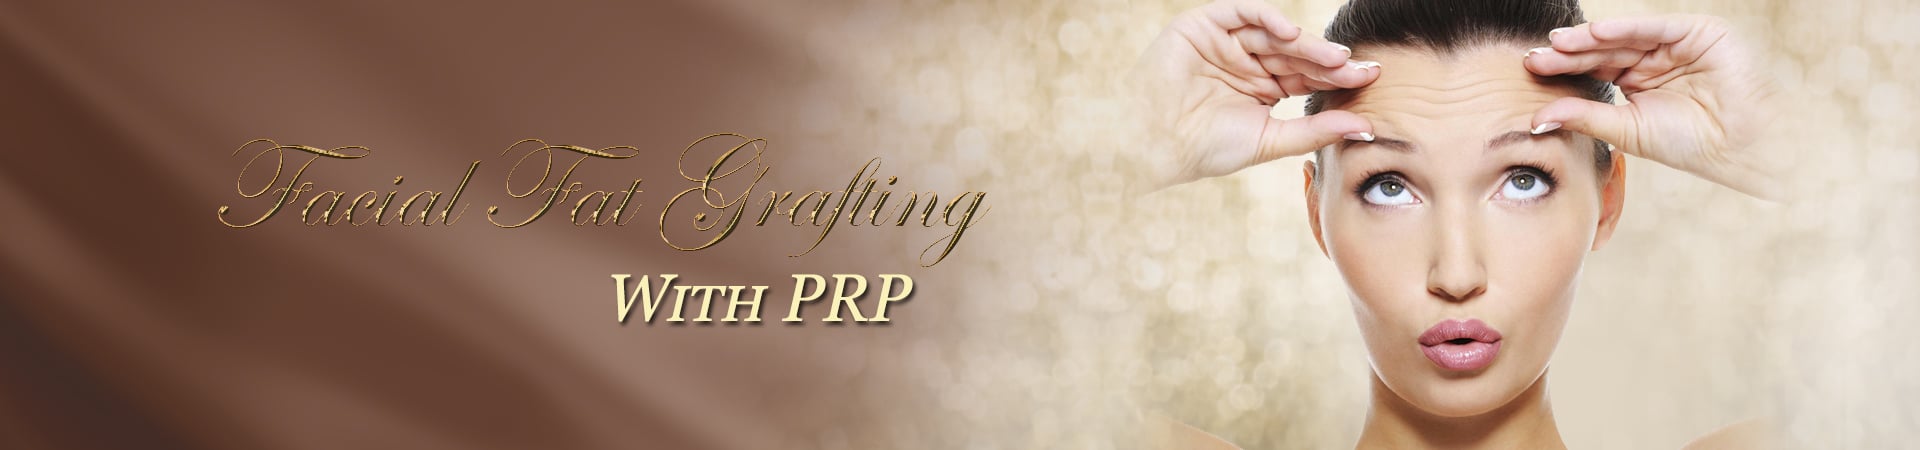 facial fat grafting with prp